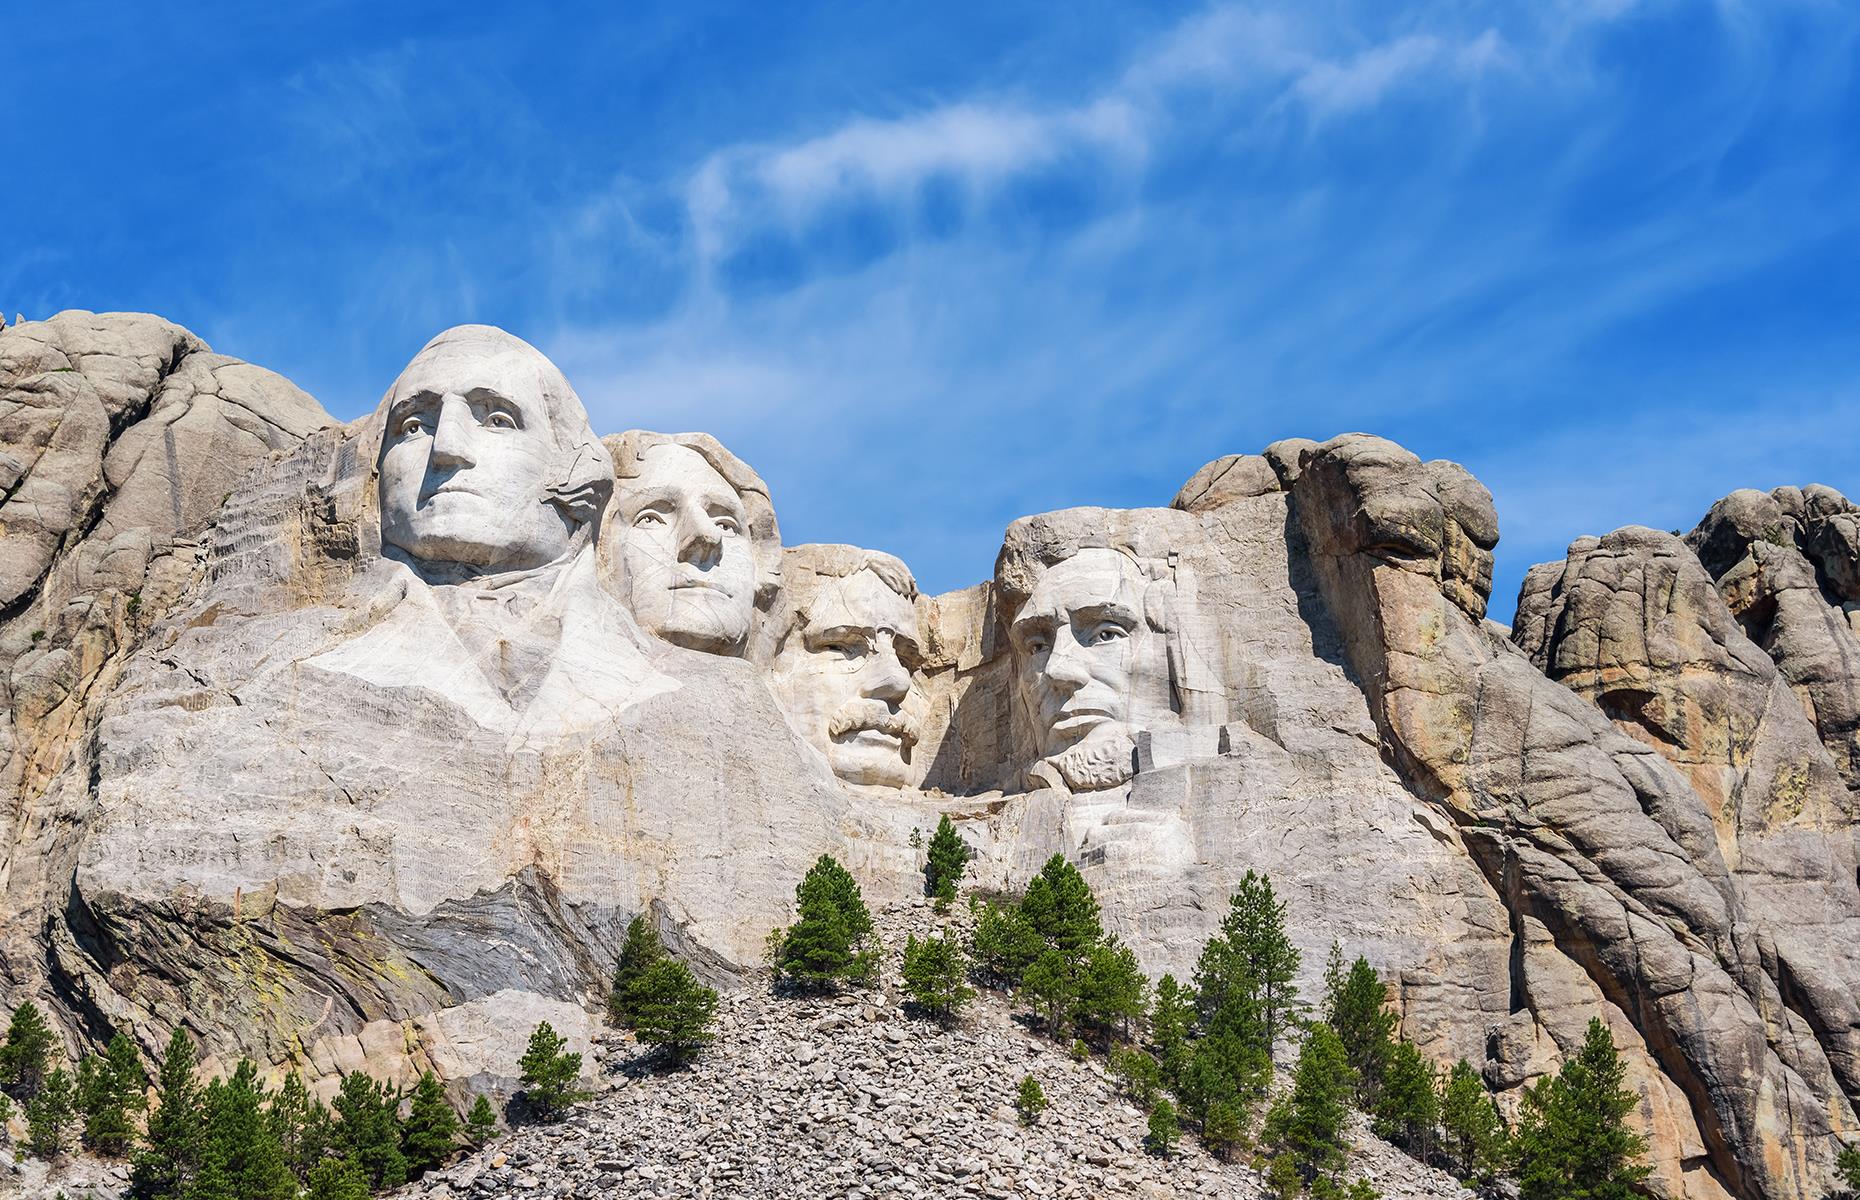 <p>If you've never had a chance to visit South Dakota and Mount Rushmore, this is the perfect opportunity to explore its pathways, lookouts and, of course, the famous stone carvings themselves. This <a href="https://www.cyark.org/projects/mount-rushmore-national-memorial/in-depth">virtual experience</a> allows you to get an extreme close up of the four presidents' portraits carved into the Black Hills – George Washington, Abraham Lincoln, Teddy Roosevelt and Thomas Jefferson. You can find more pictures of Mount Rushmore in our feature showcasing <a href="https://www.loveexploring.com/news/93434/vintage-images-of-americas-most-historic-attractions">historic images of America's tourist attractions</a> too. </p>